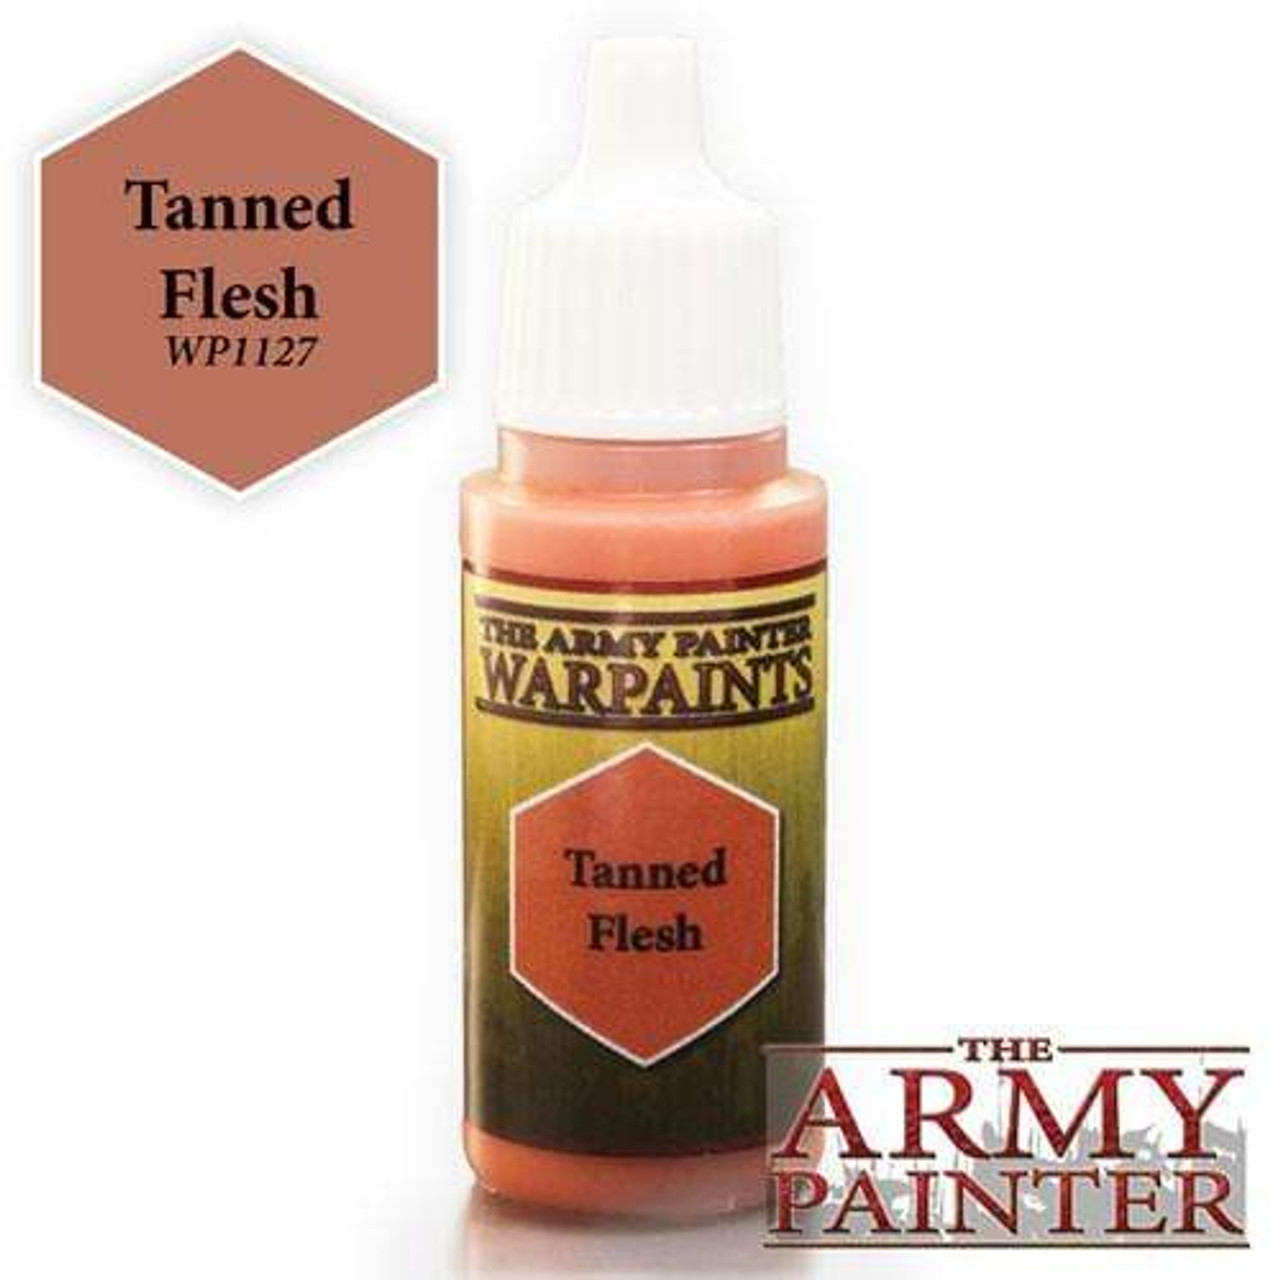 Army Painter Warpaint - Tanned Flesh